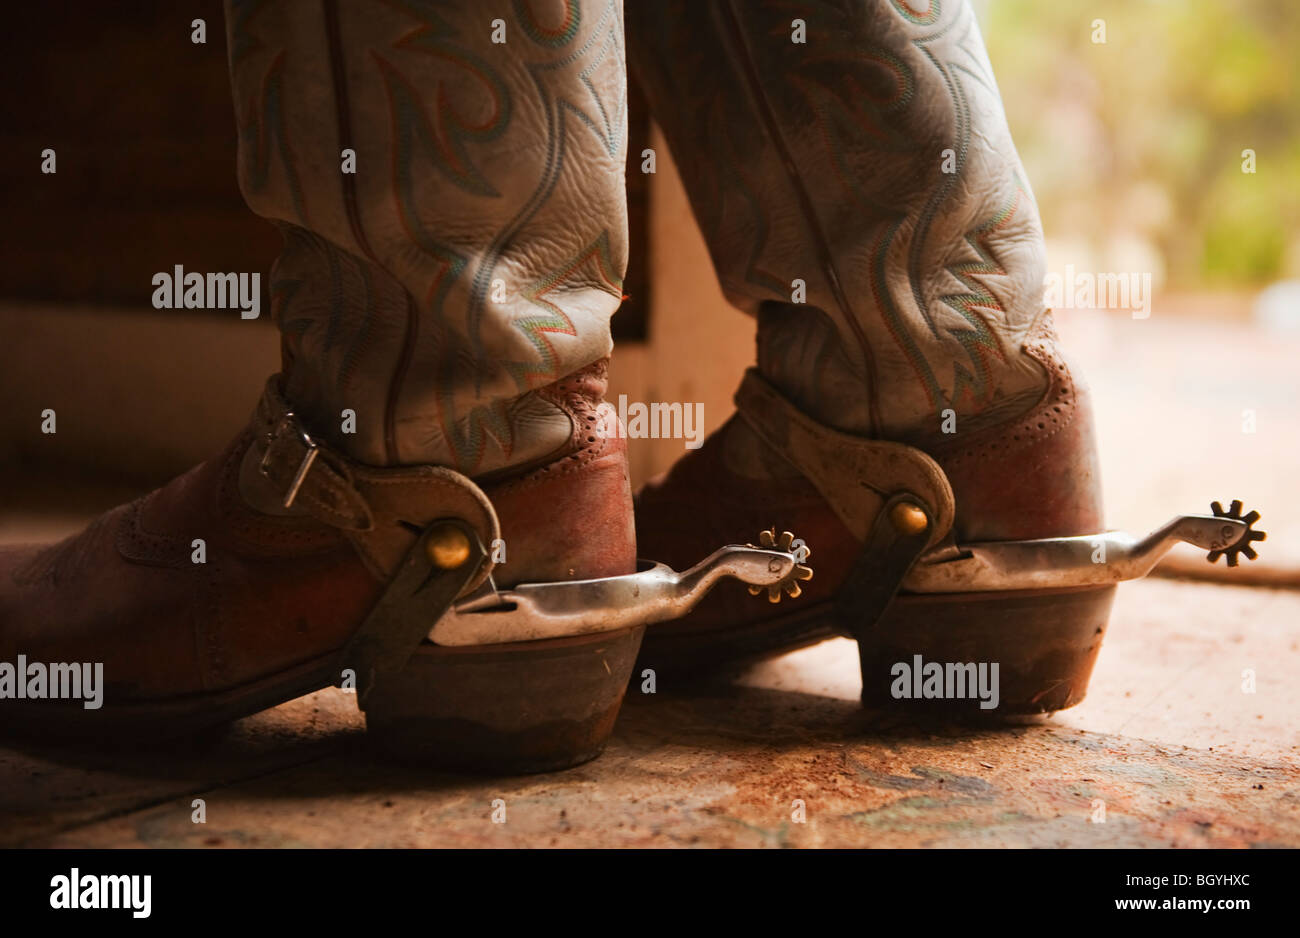 Spurs on cowboy boots Stock Photo